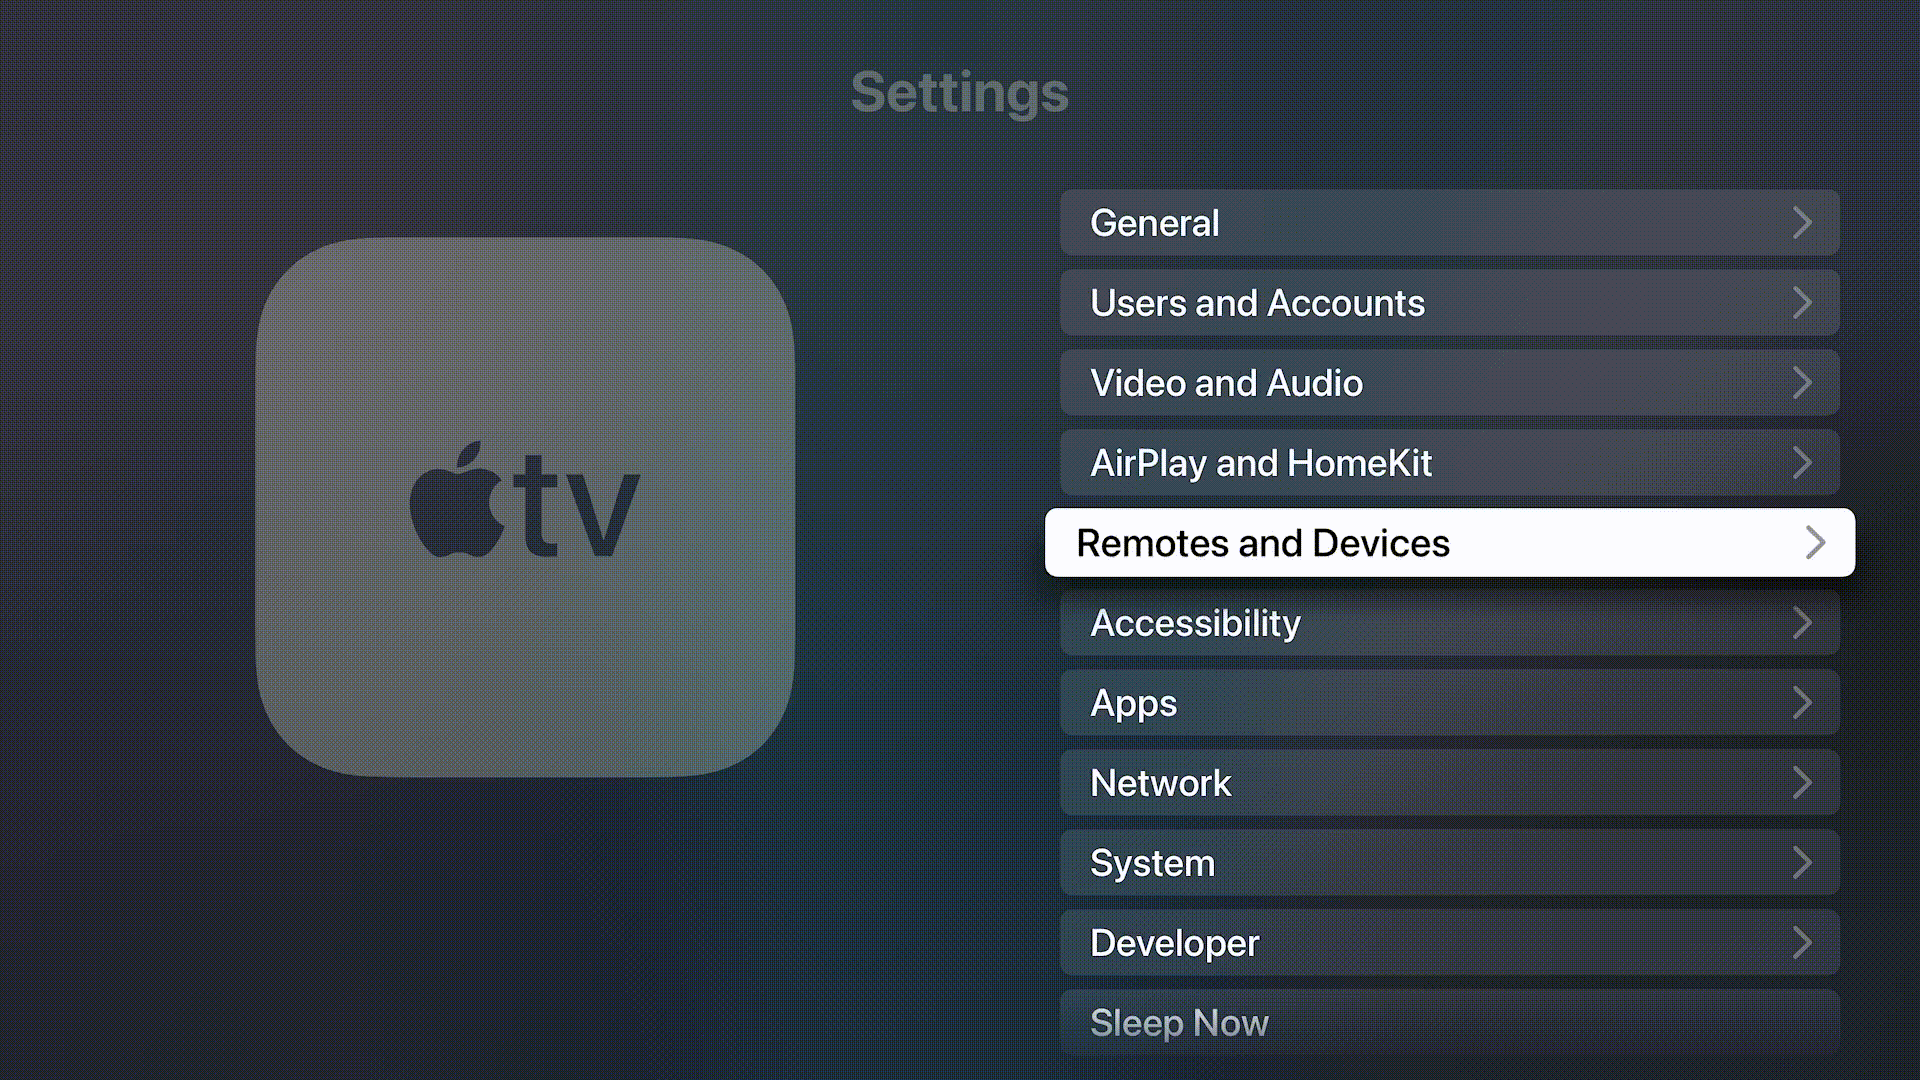 Turn On Your Remote” - Apple Community